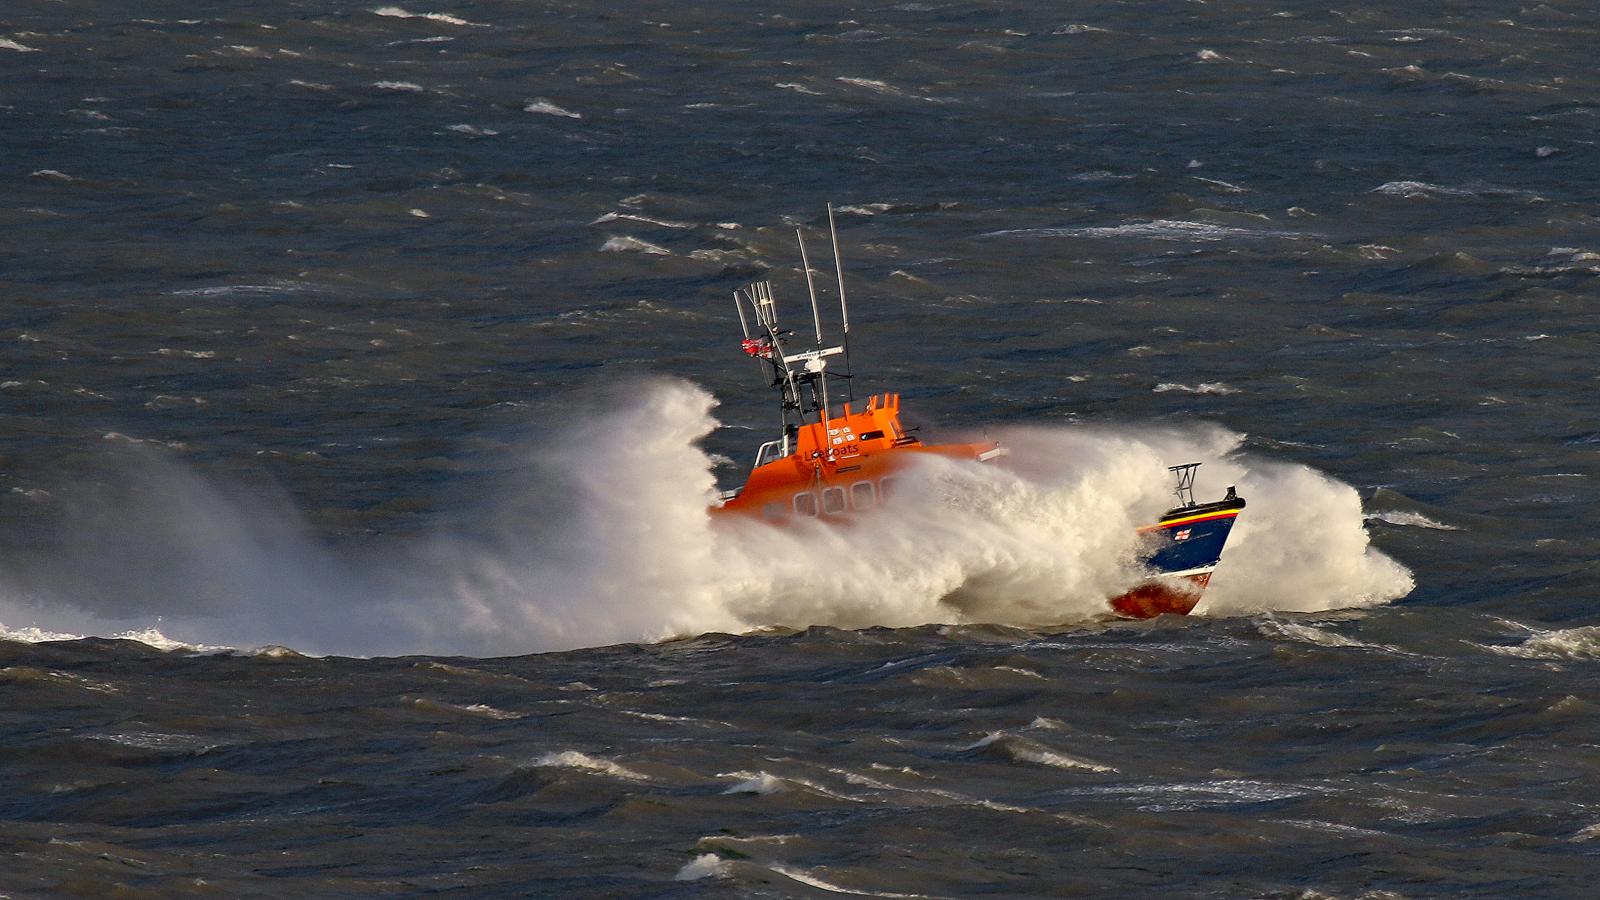 Barry Dock Lifeboat 14-29